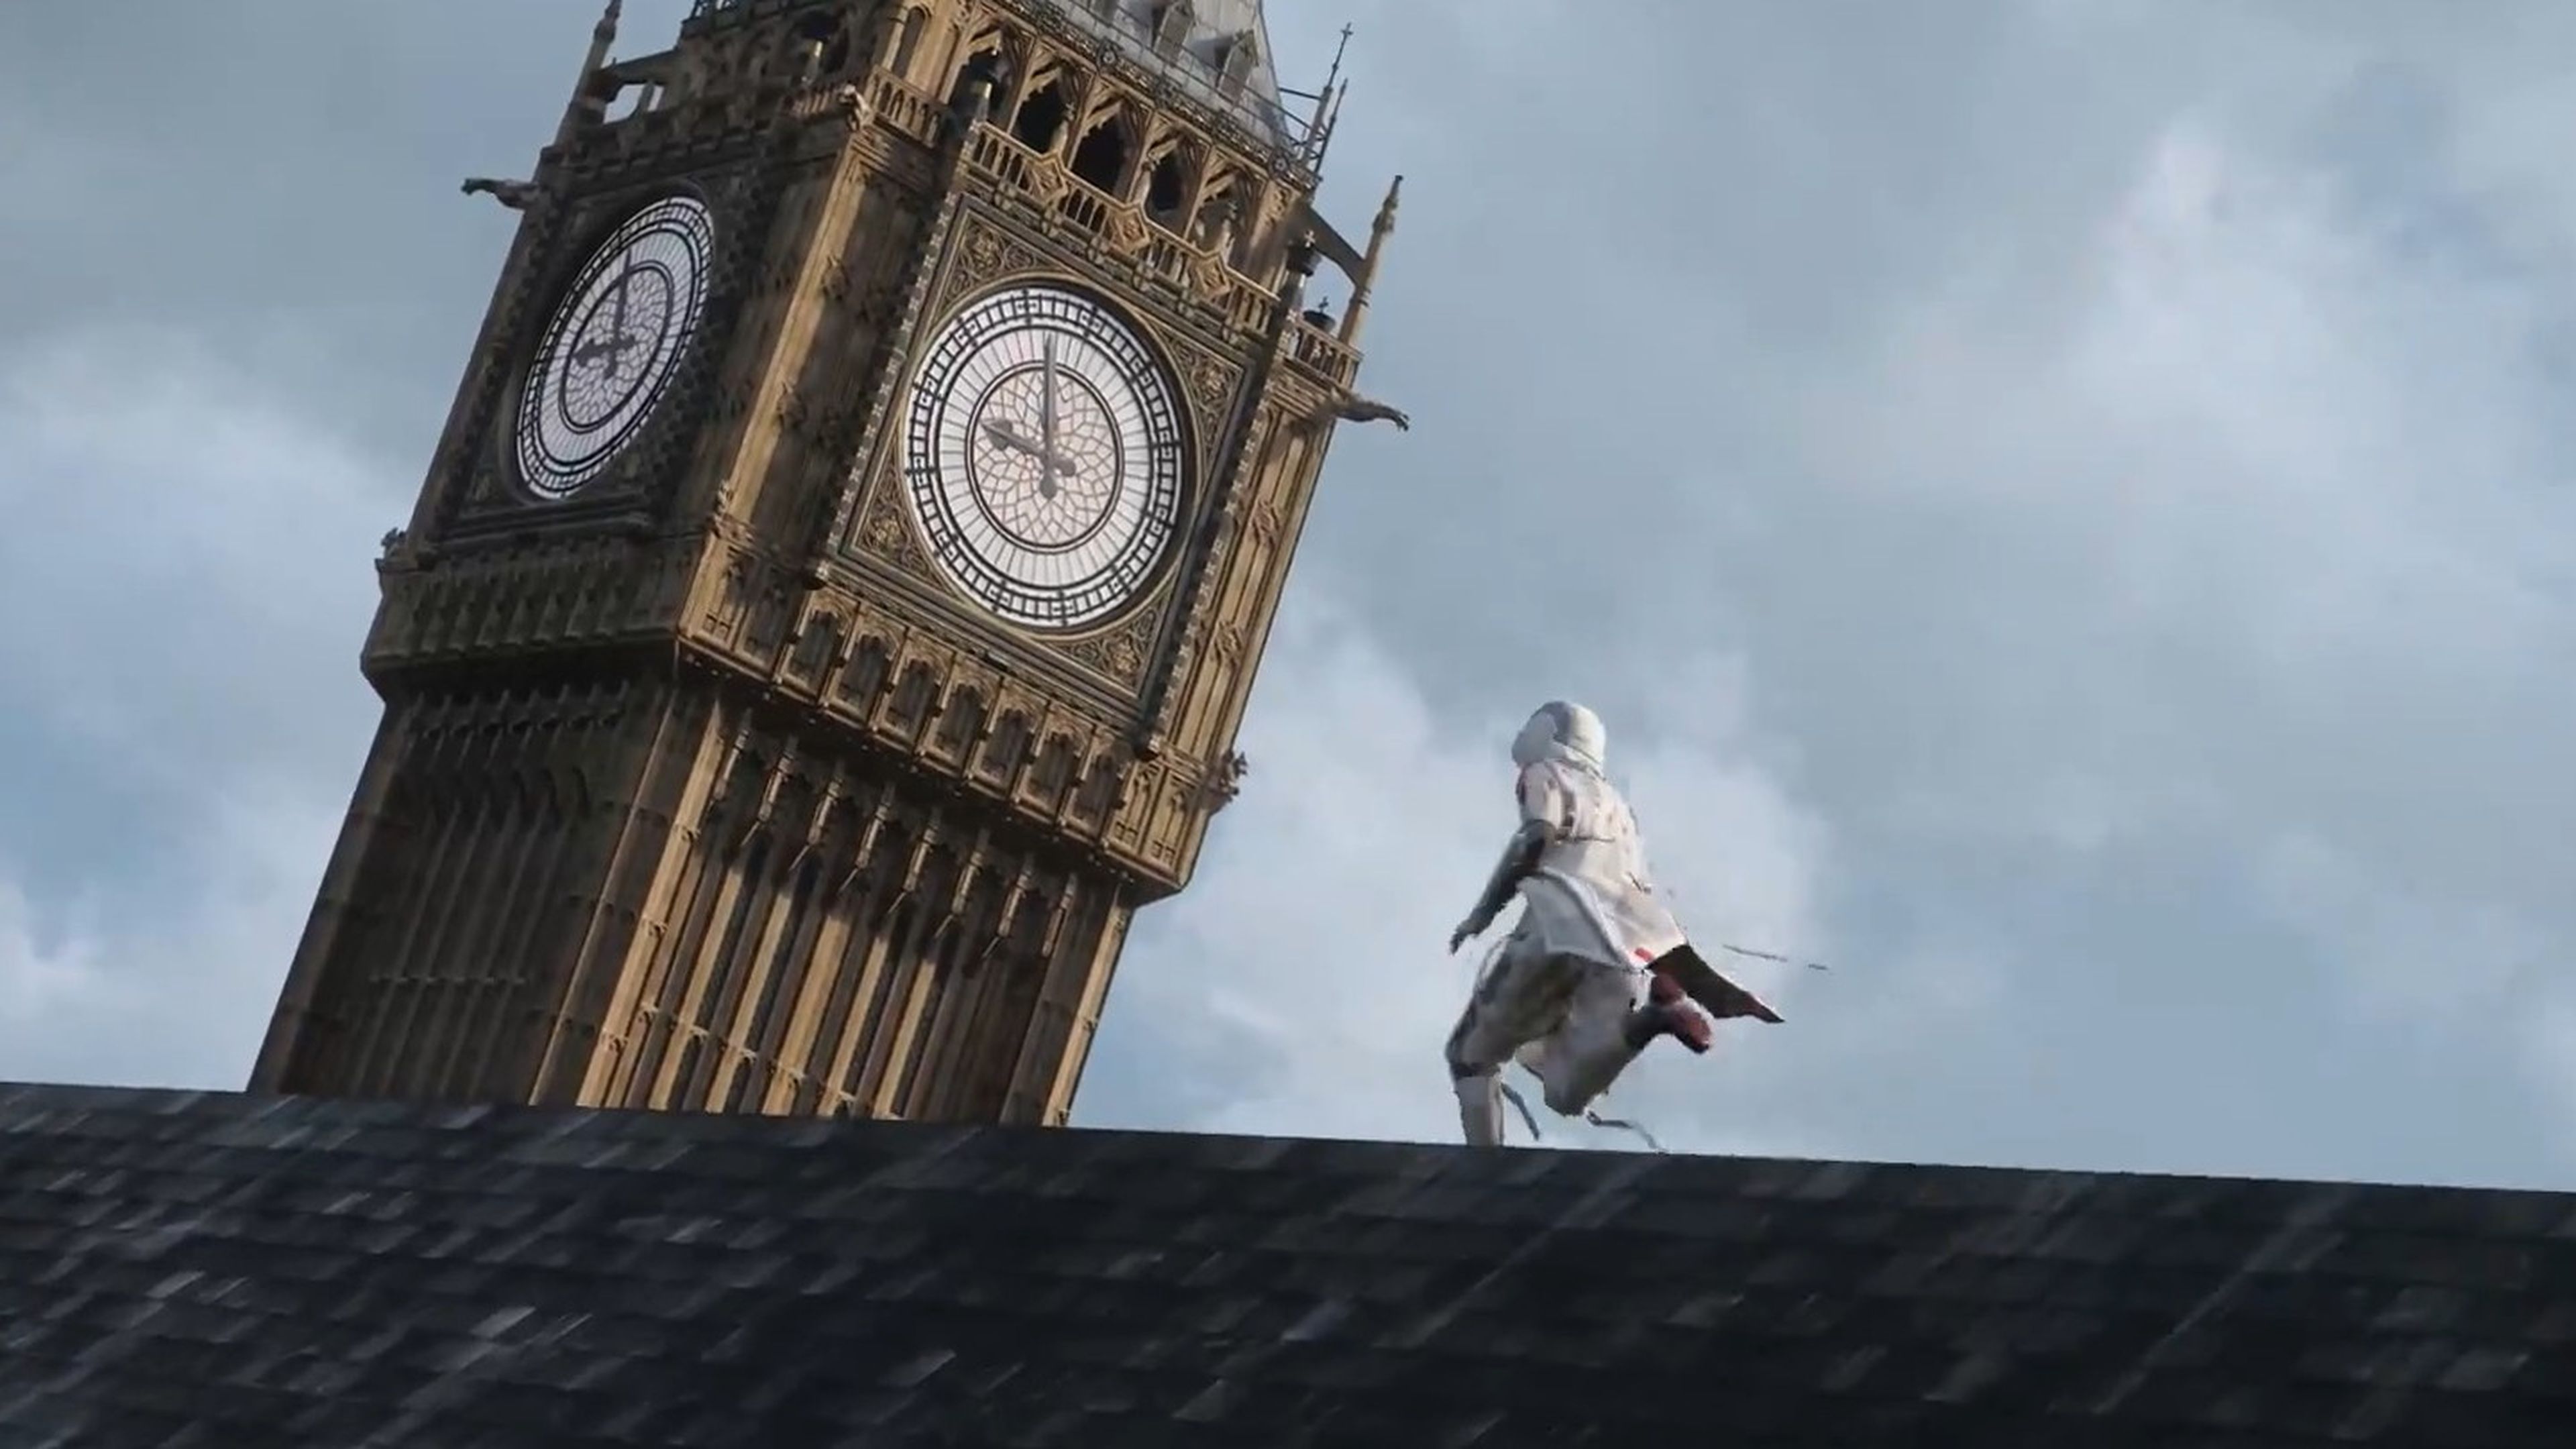 Watch Dogs Legion Assassin's Creed